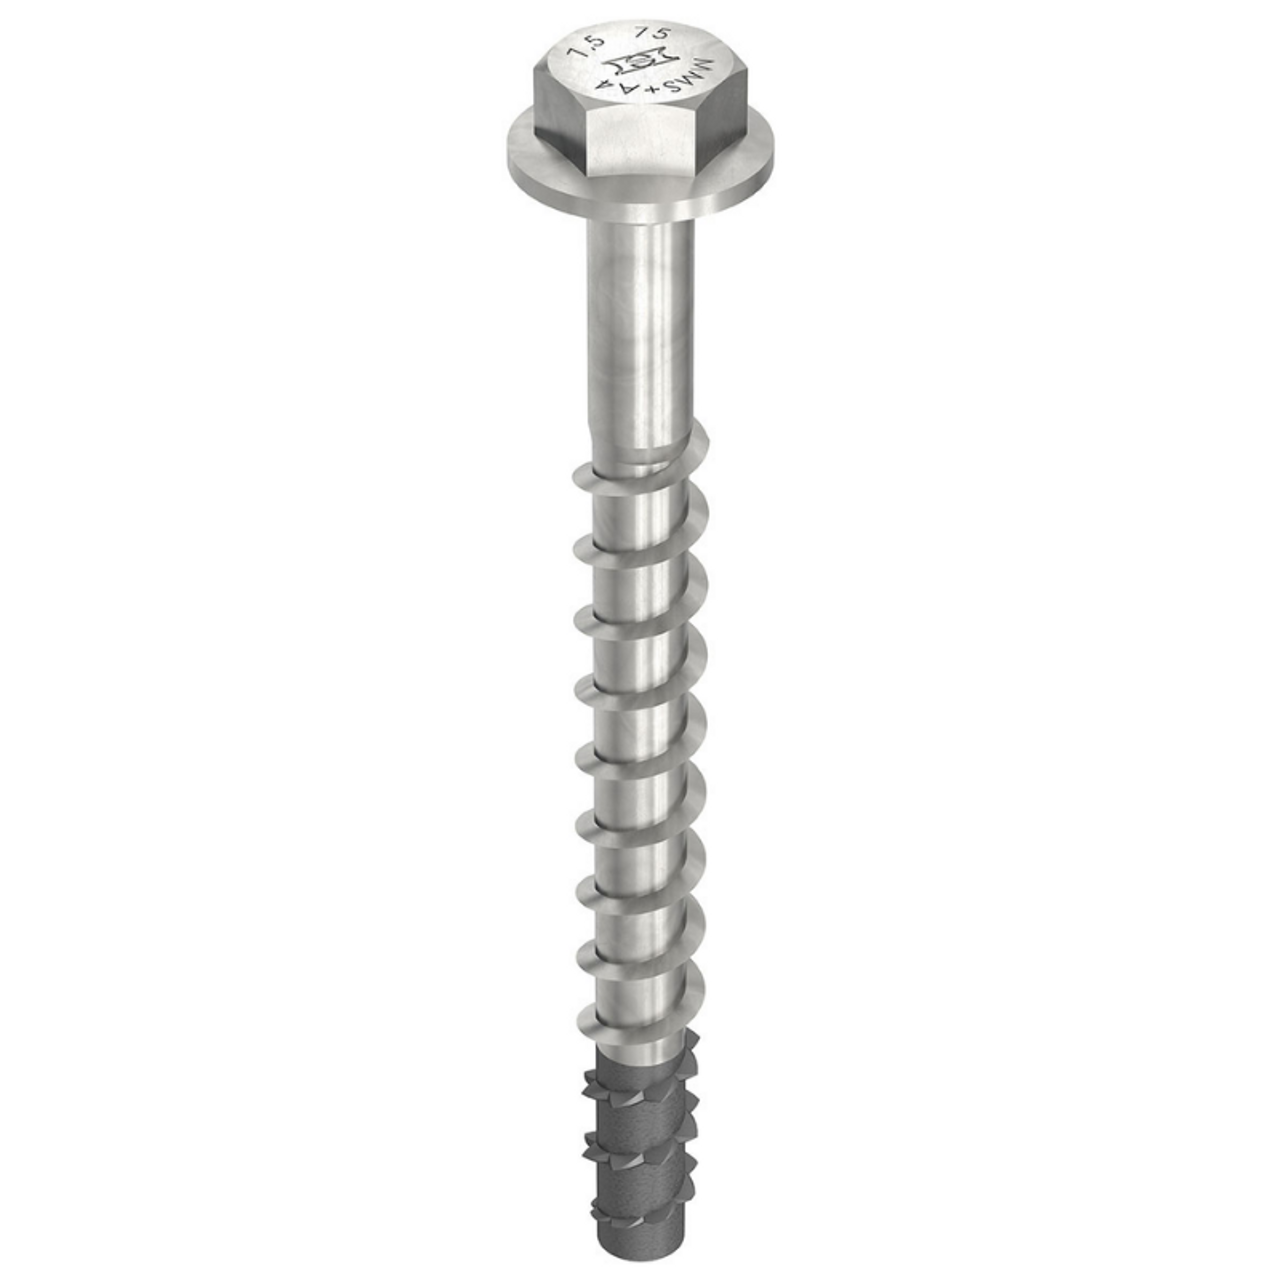 Craftsman Hardware supplies Hexagon Head Screw Anchor such as HECO 10mm A4 316 Stainless Steel Hexagon Head Screw Anchor for the Construction Industry in Australia and New Zealand